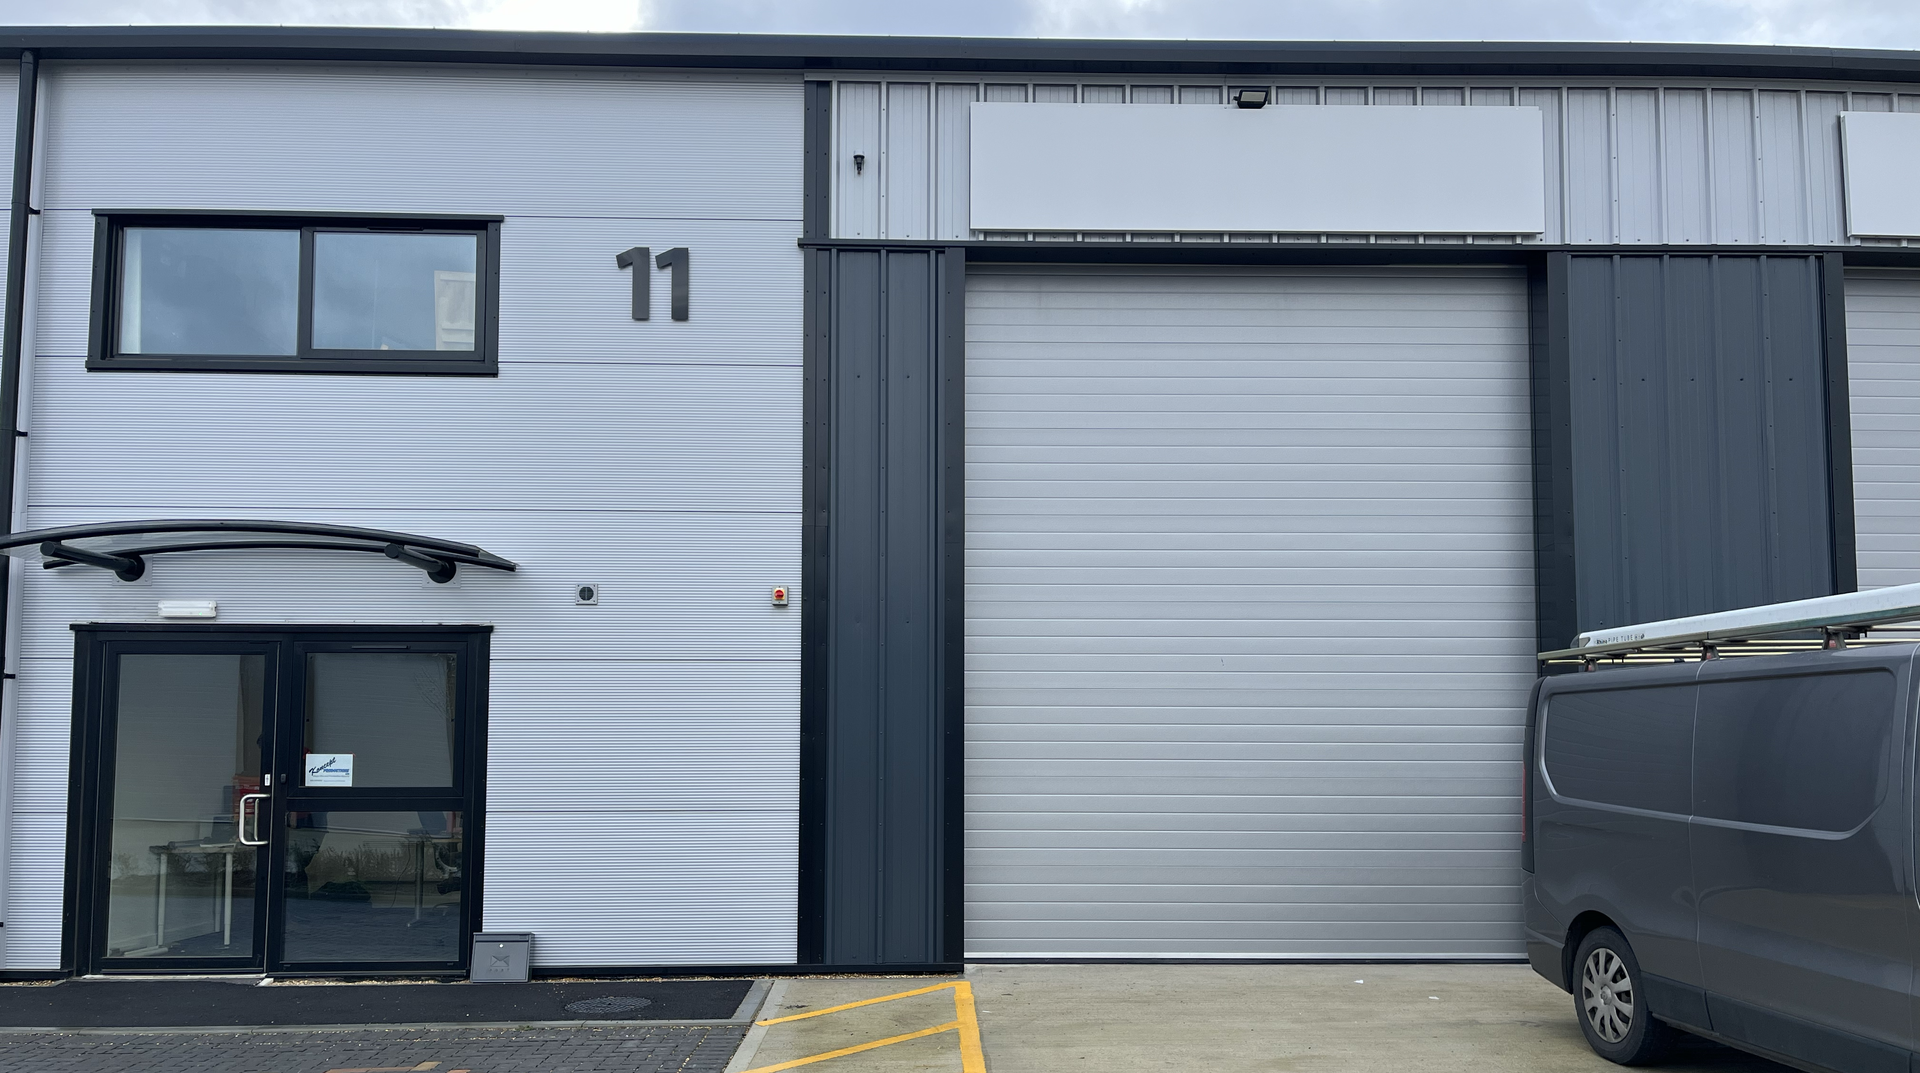 A grey warehouse, with the number 11 on the front, a normal door and a large sliding door to the right.